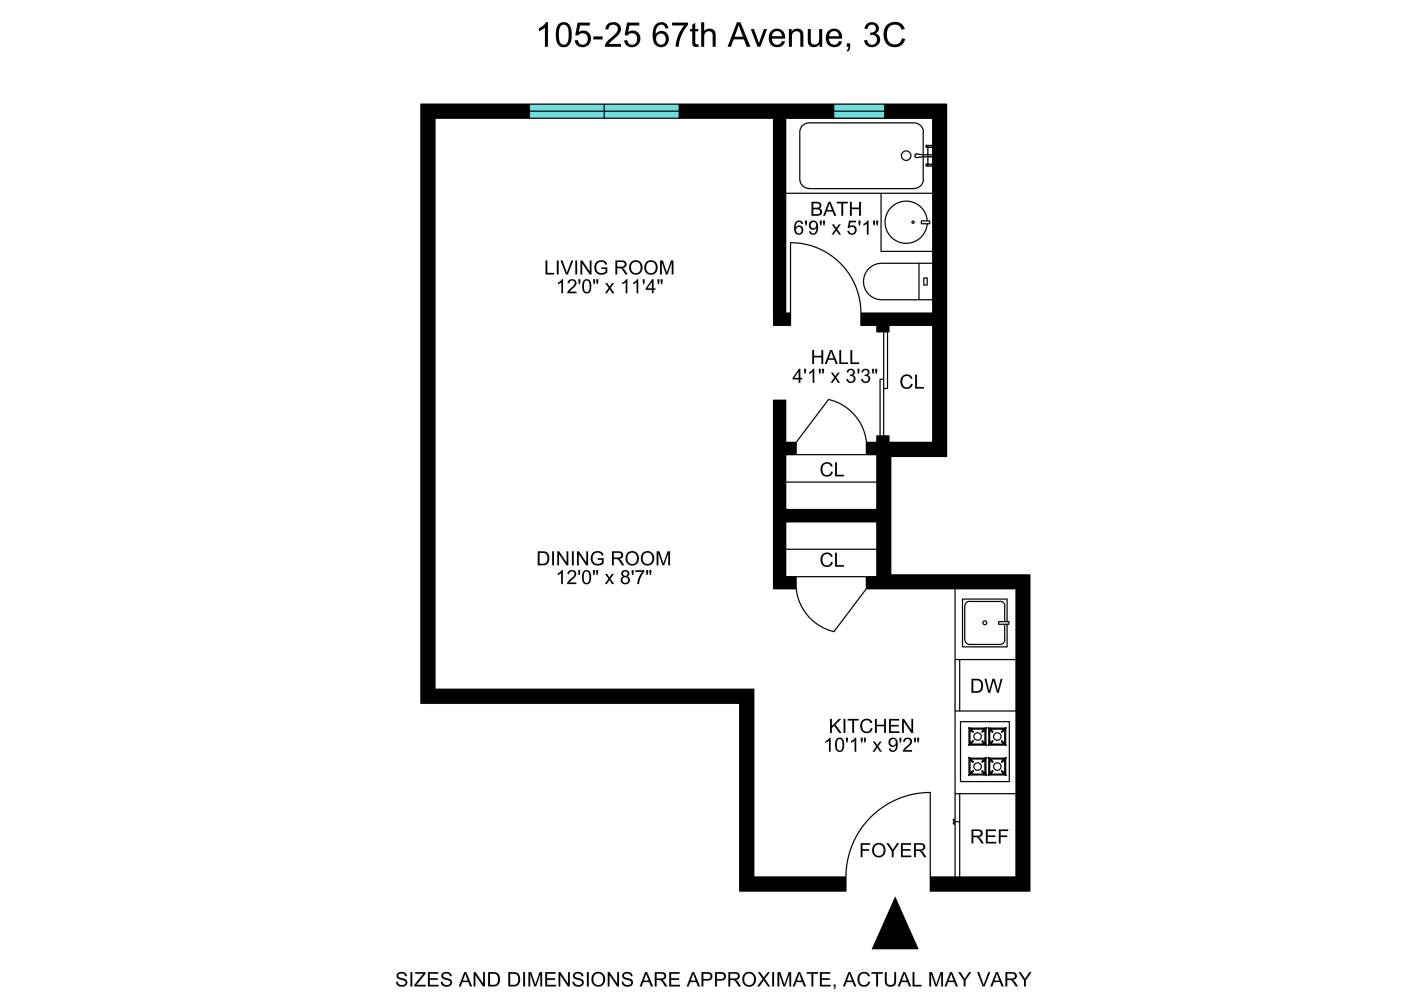 Floorplan for 105-25 67th Ave